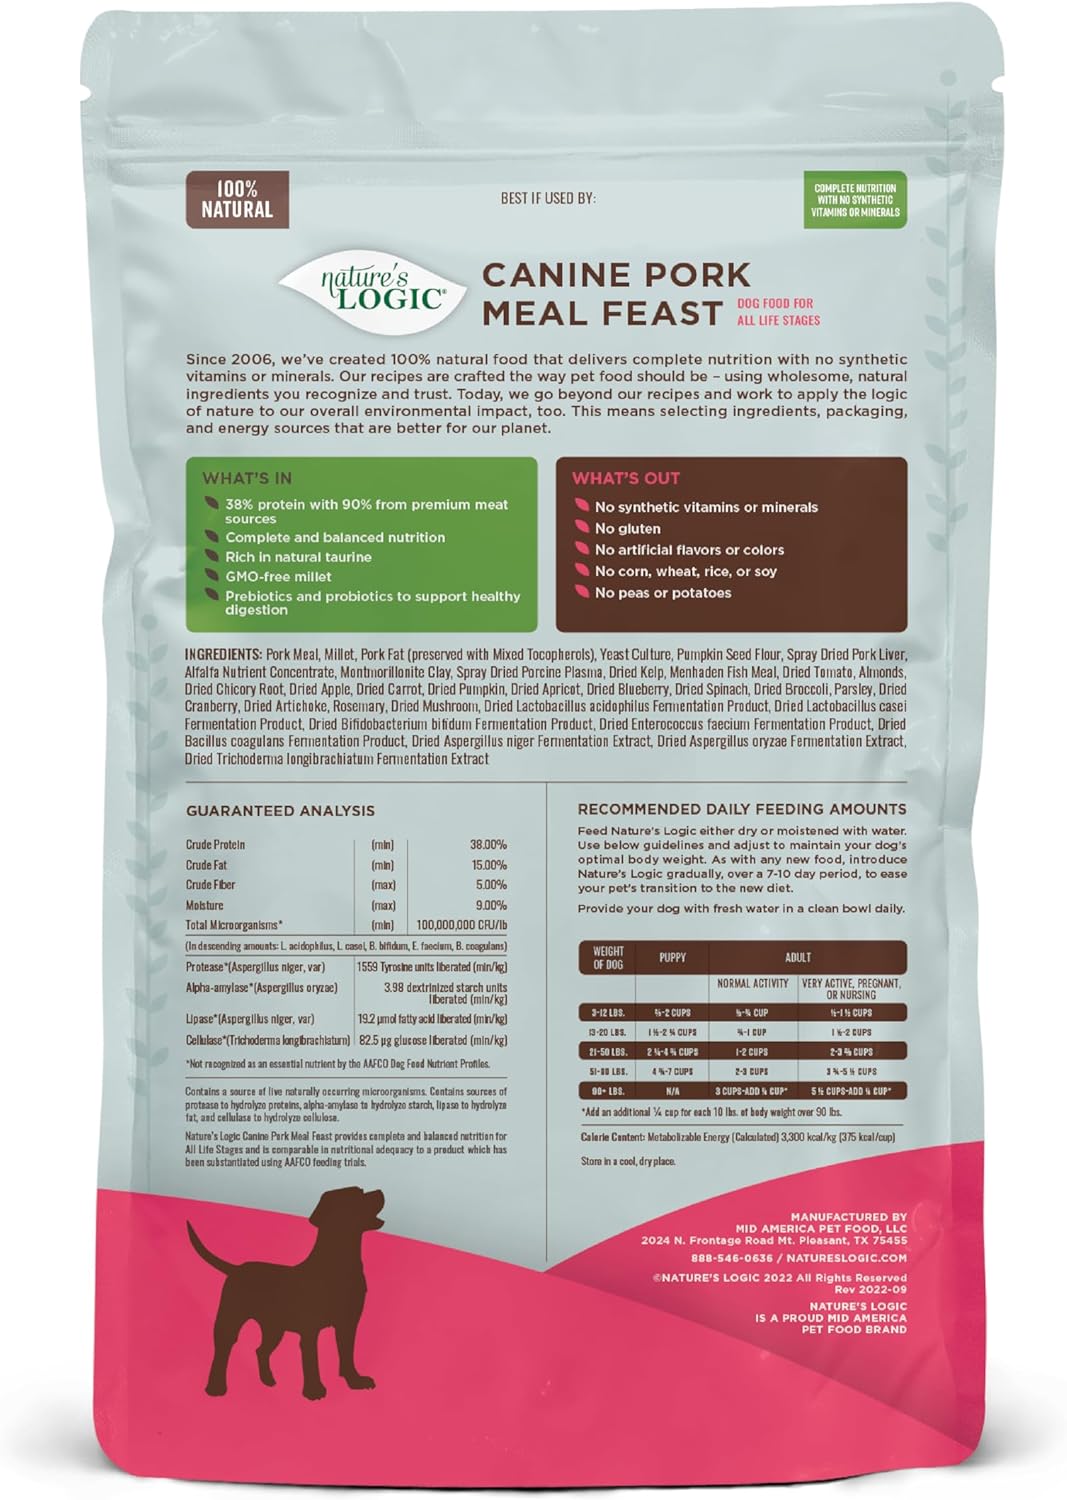 Nature’s Logic Canine Pork Meal Feast Dry Dog Food – Gallery Image 4